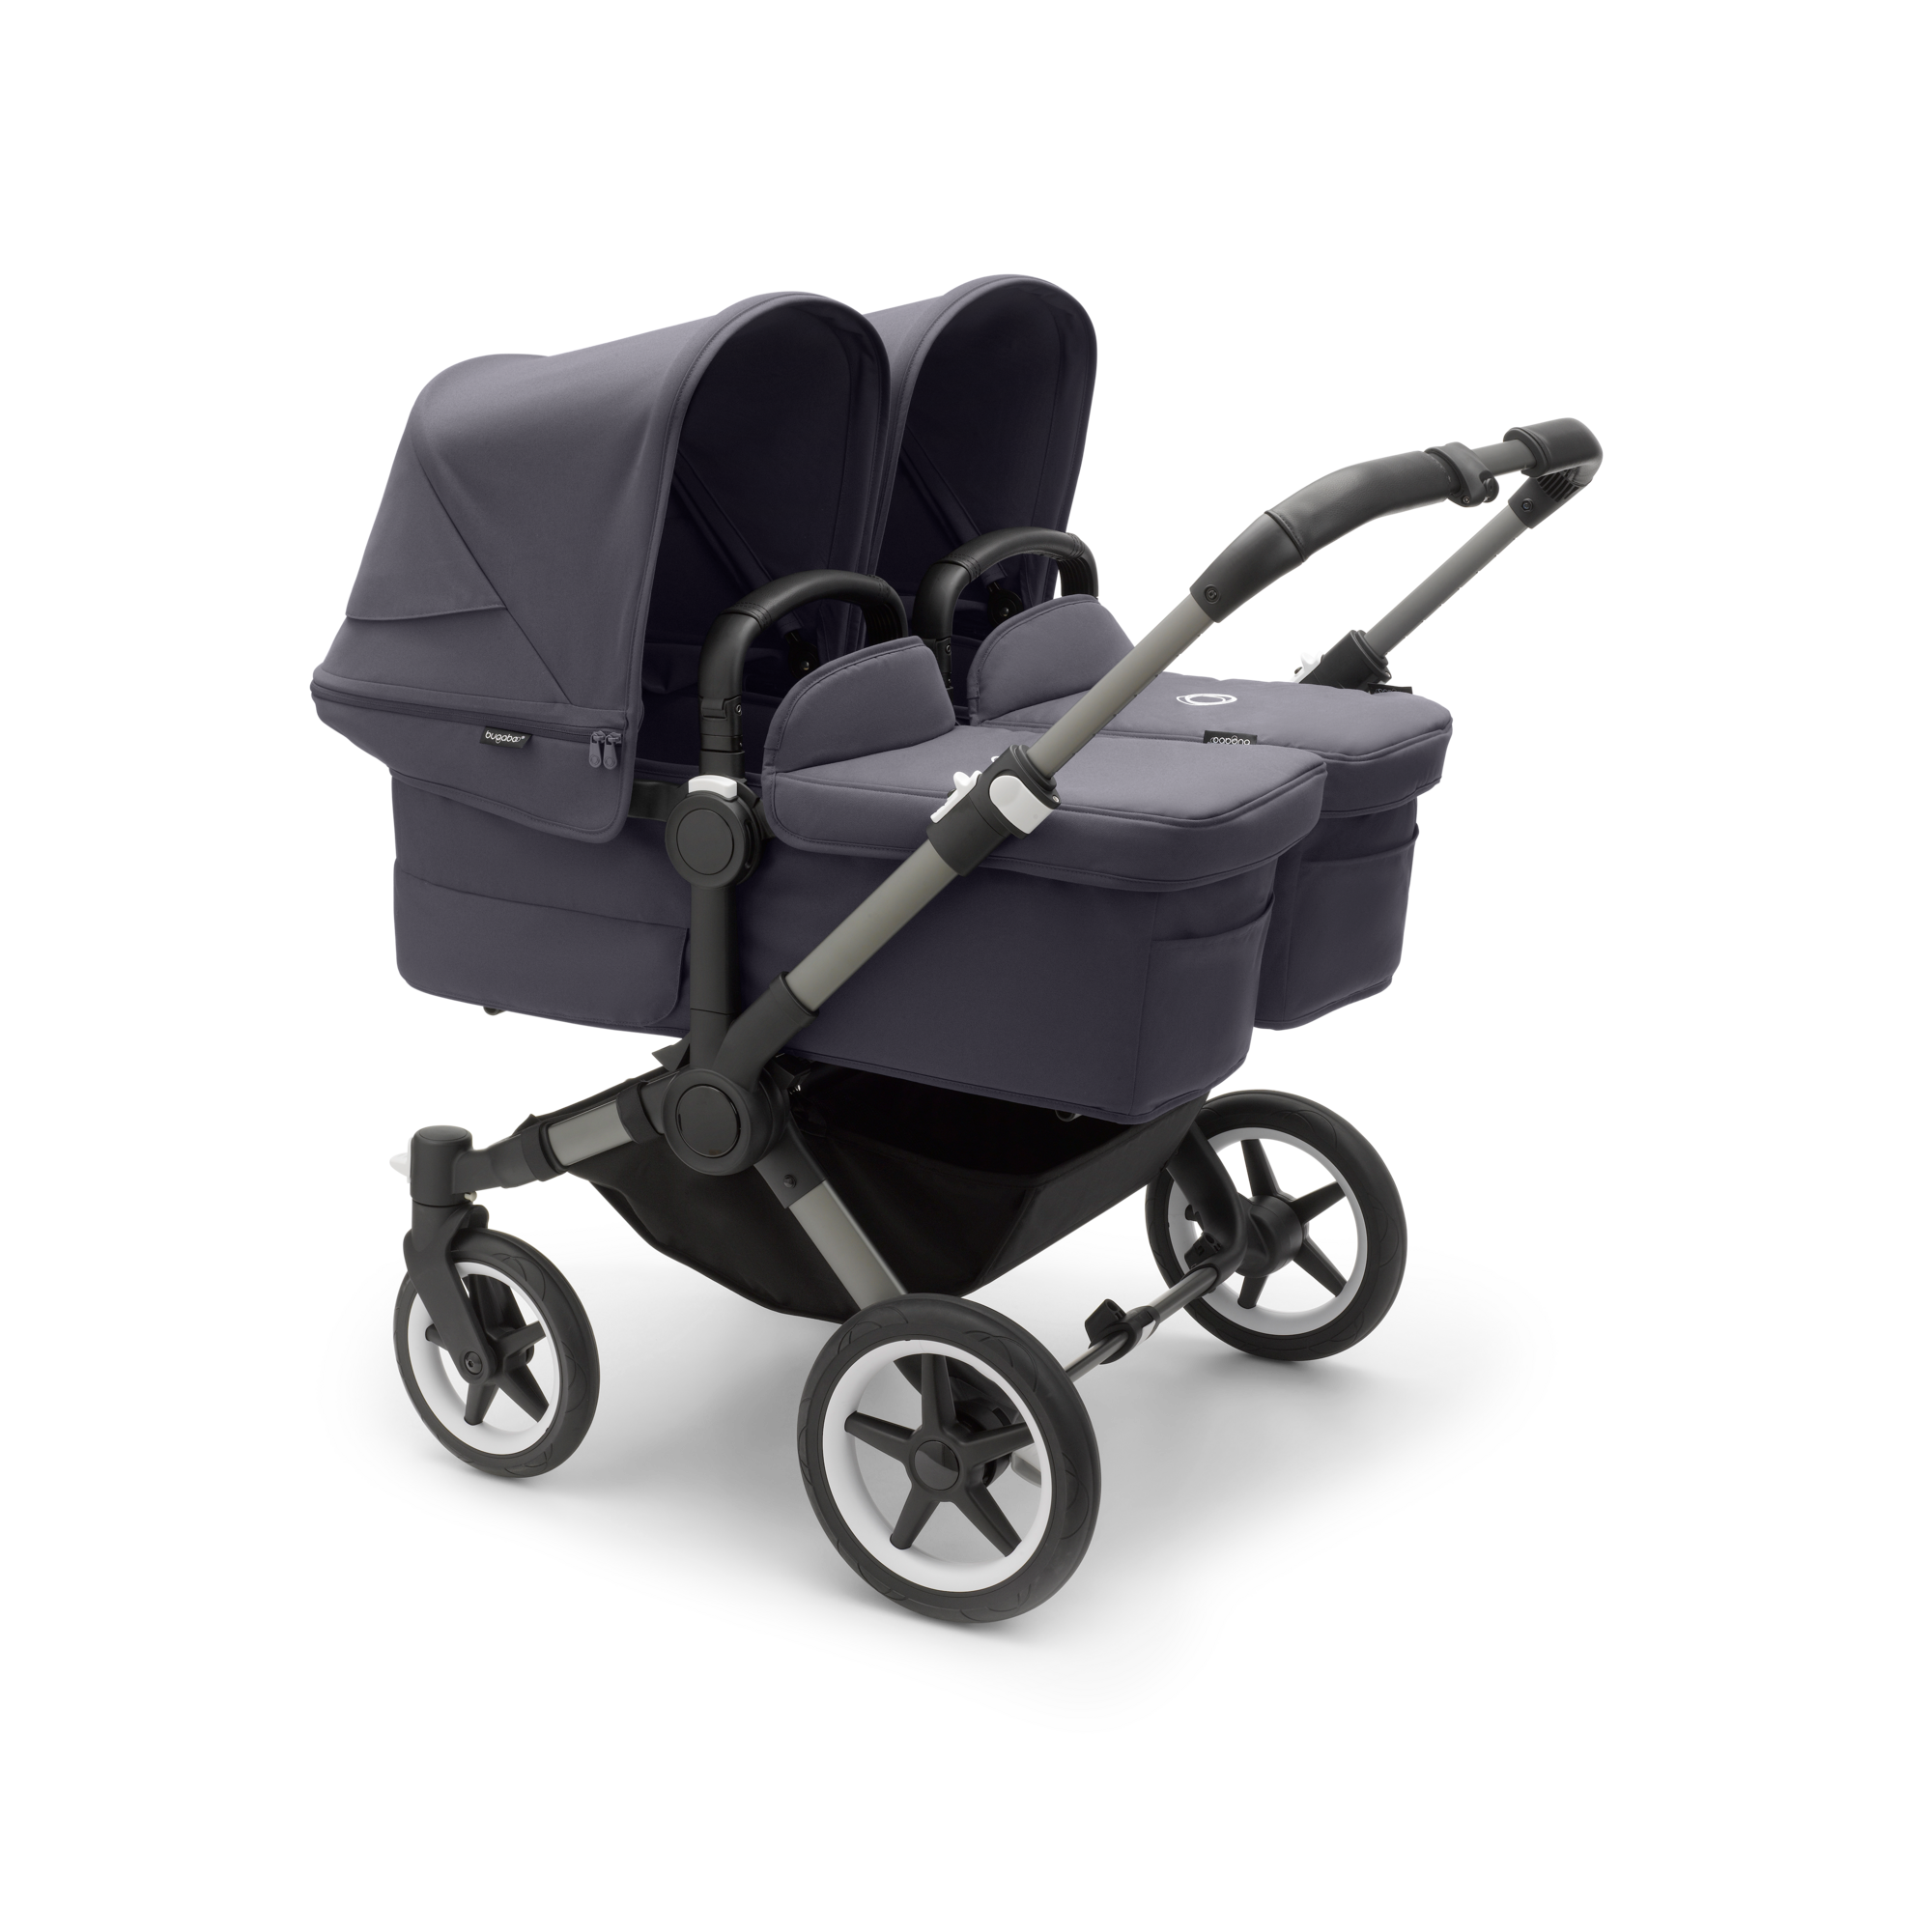 Bugaboo Donkey 5 Twin bassinet and seat stroller graphite base stormy blue fabrics stormy blue sun canopy